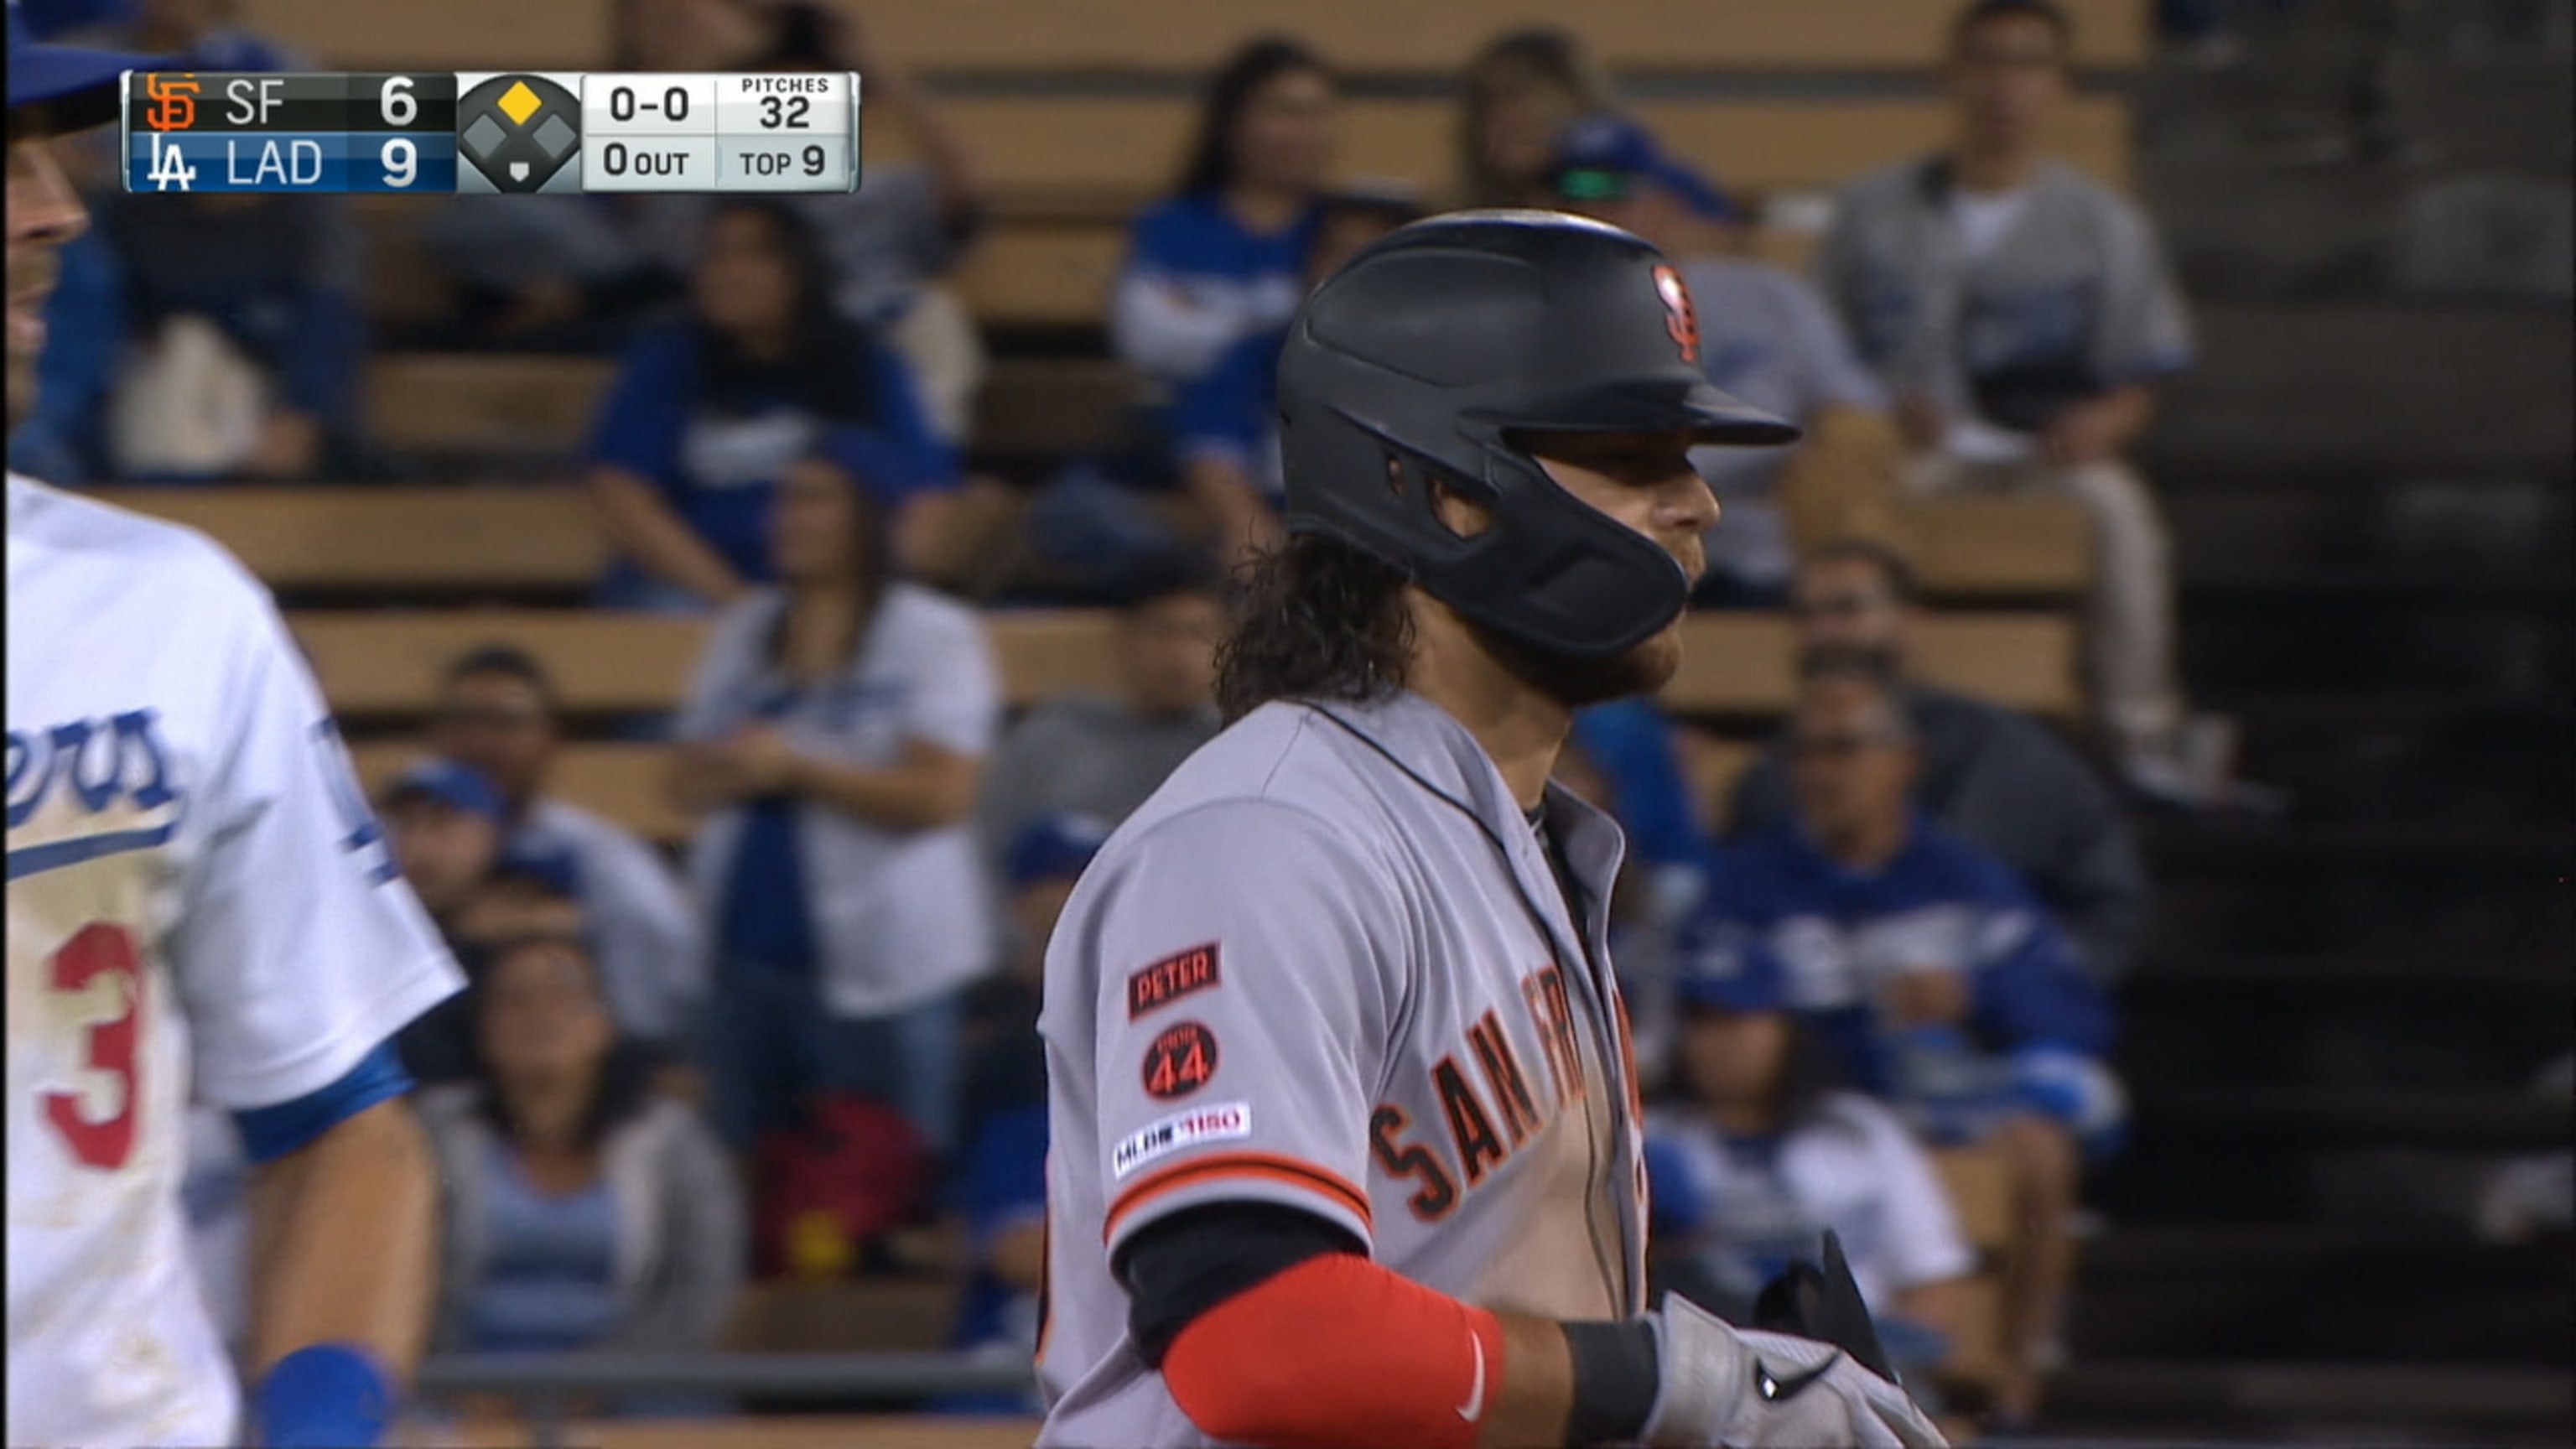 Madison Bumgarner upset again after Dodgers player hits home run off him  into McCovey Cove